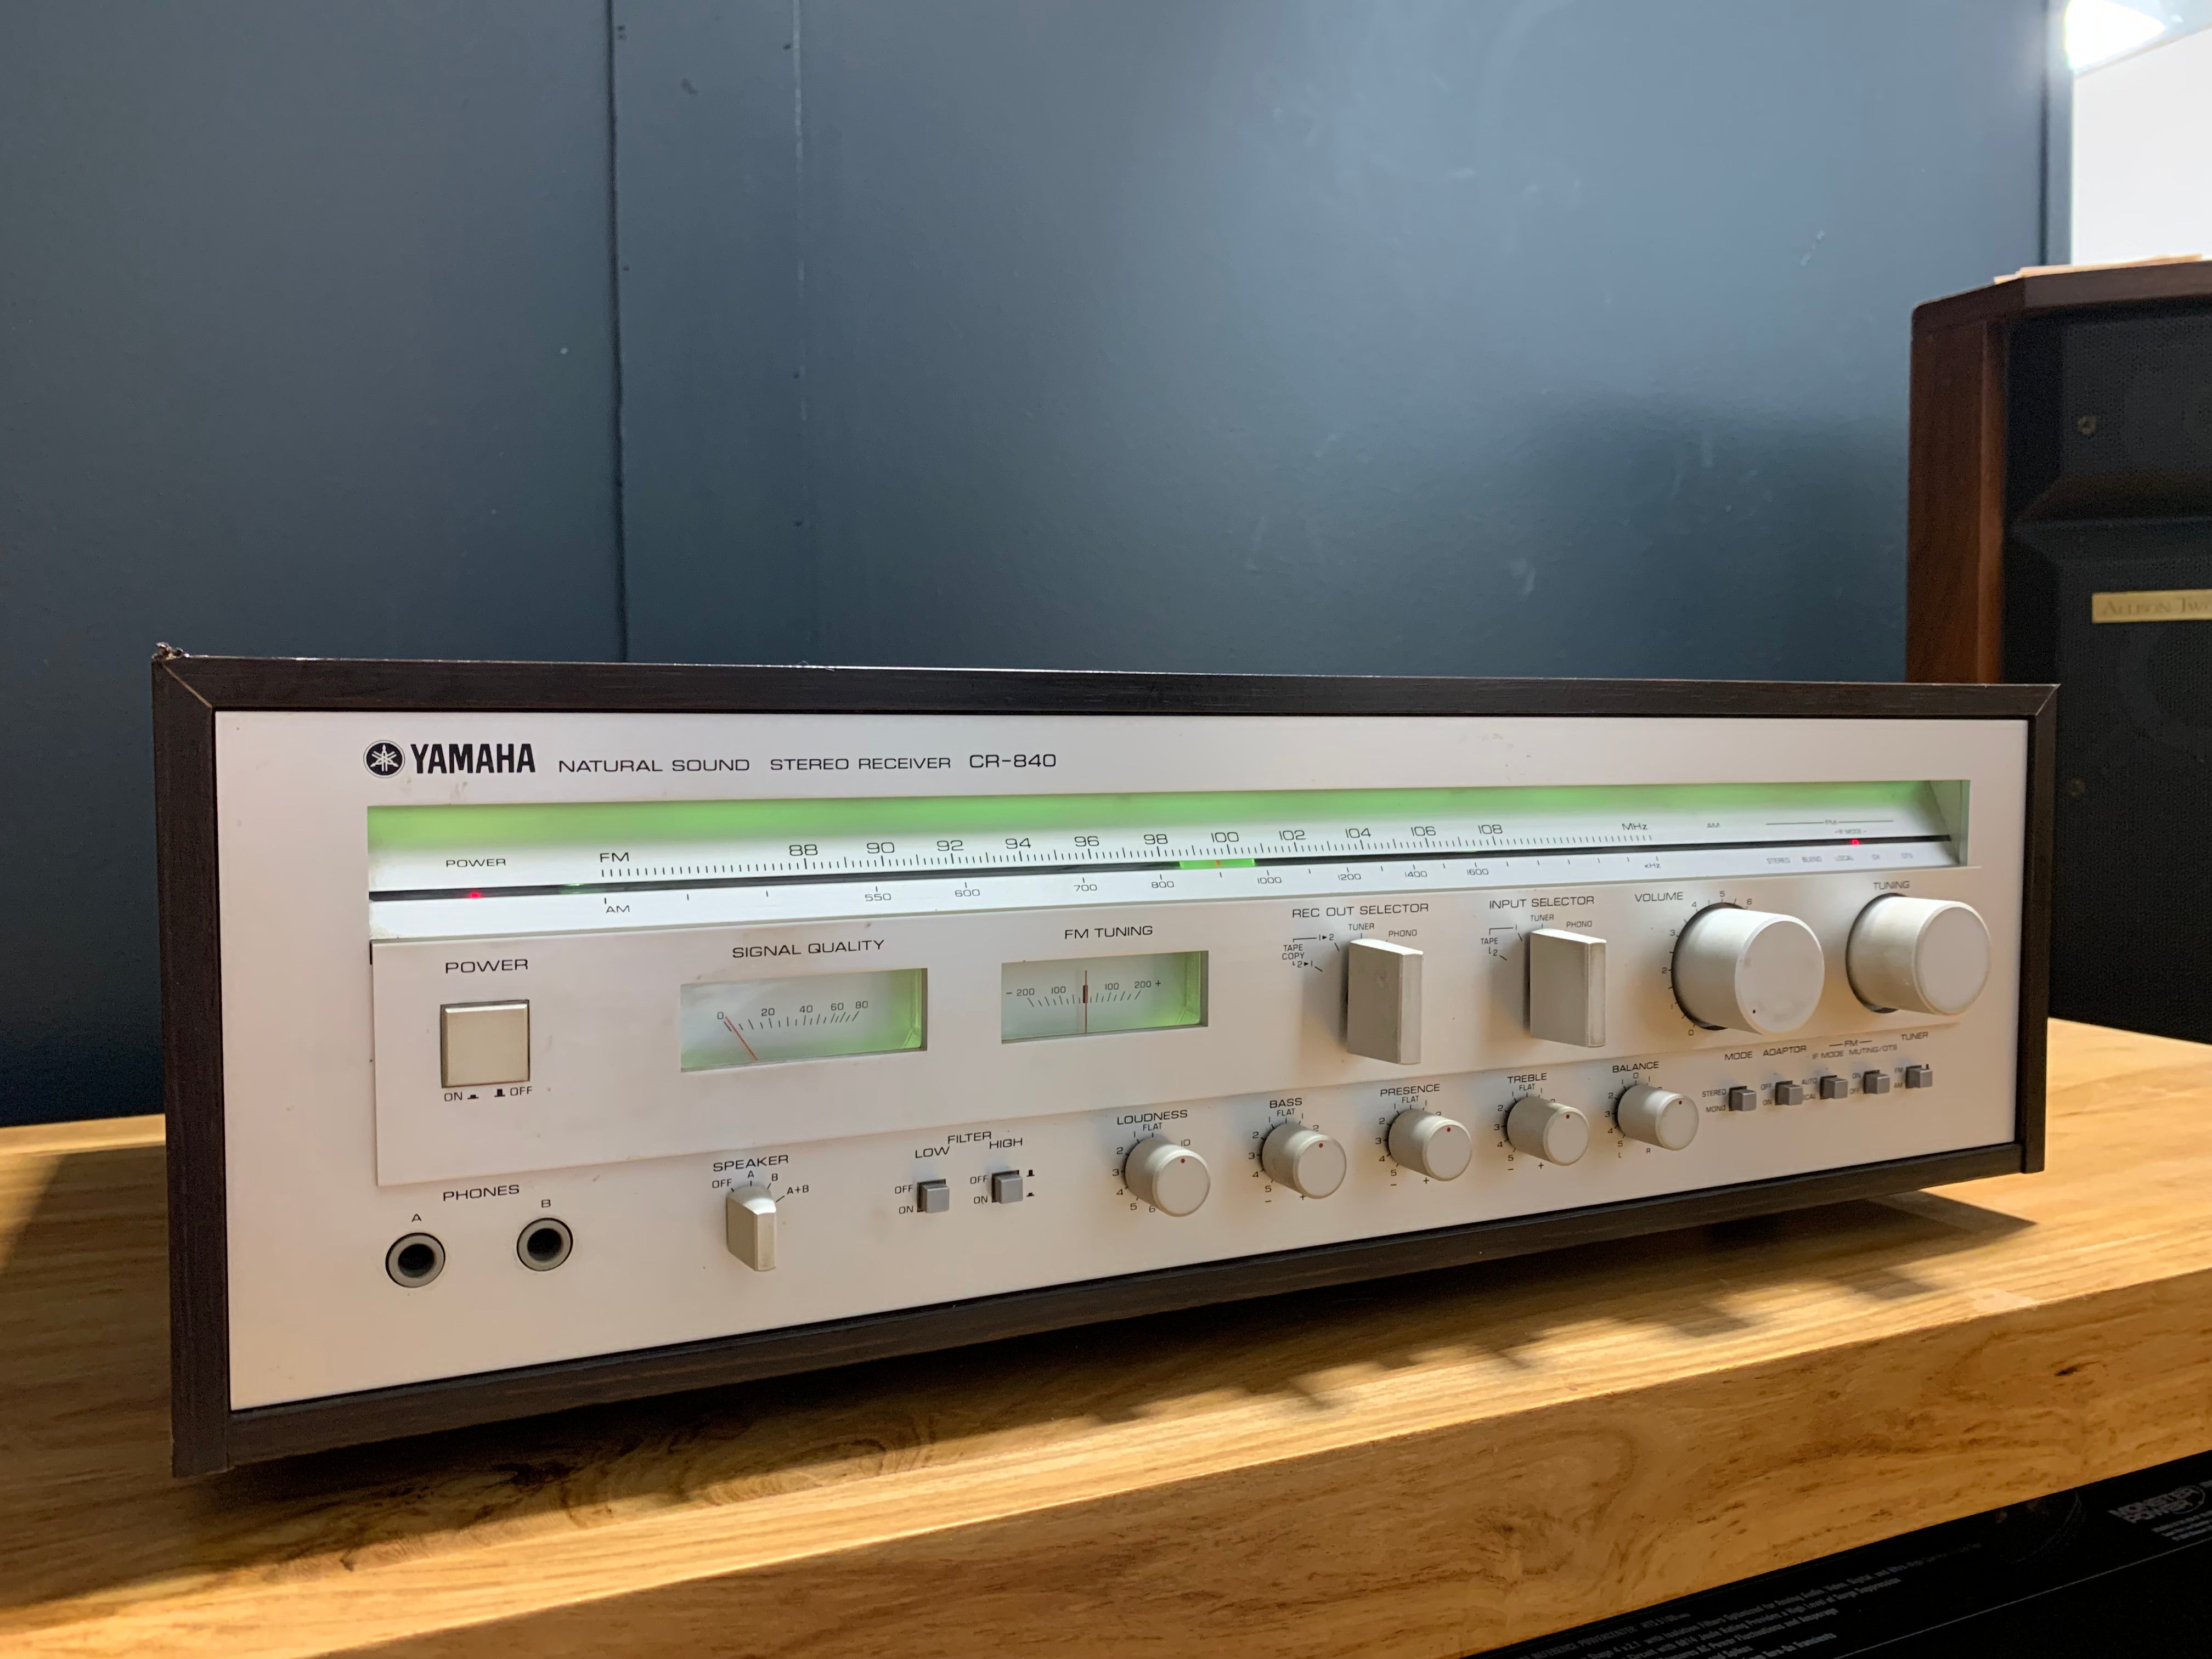 Yamaha CR-840 Receiver, Great Value! - SOLD